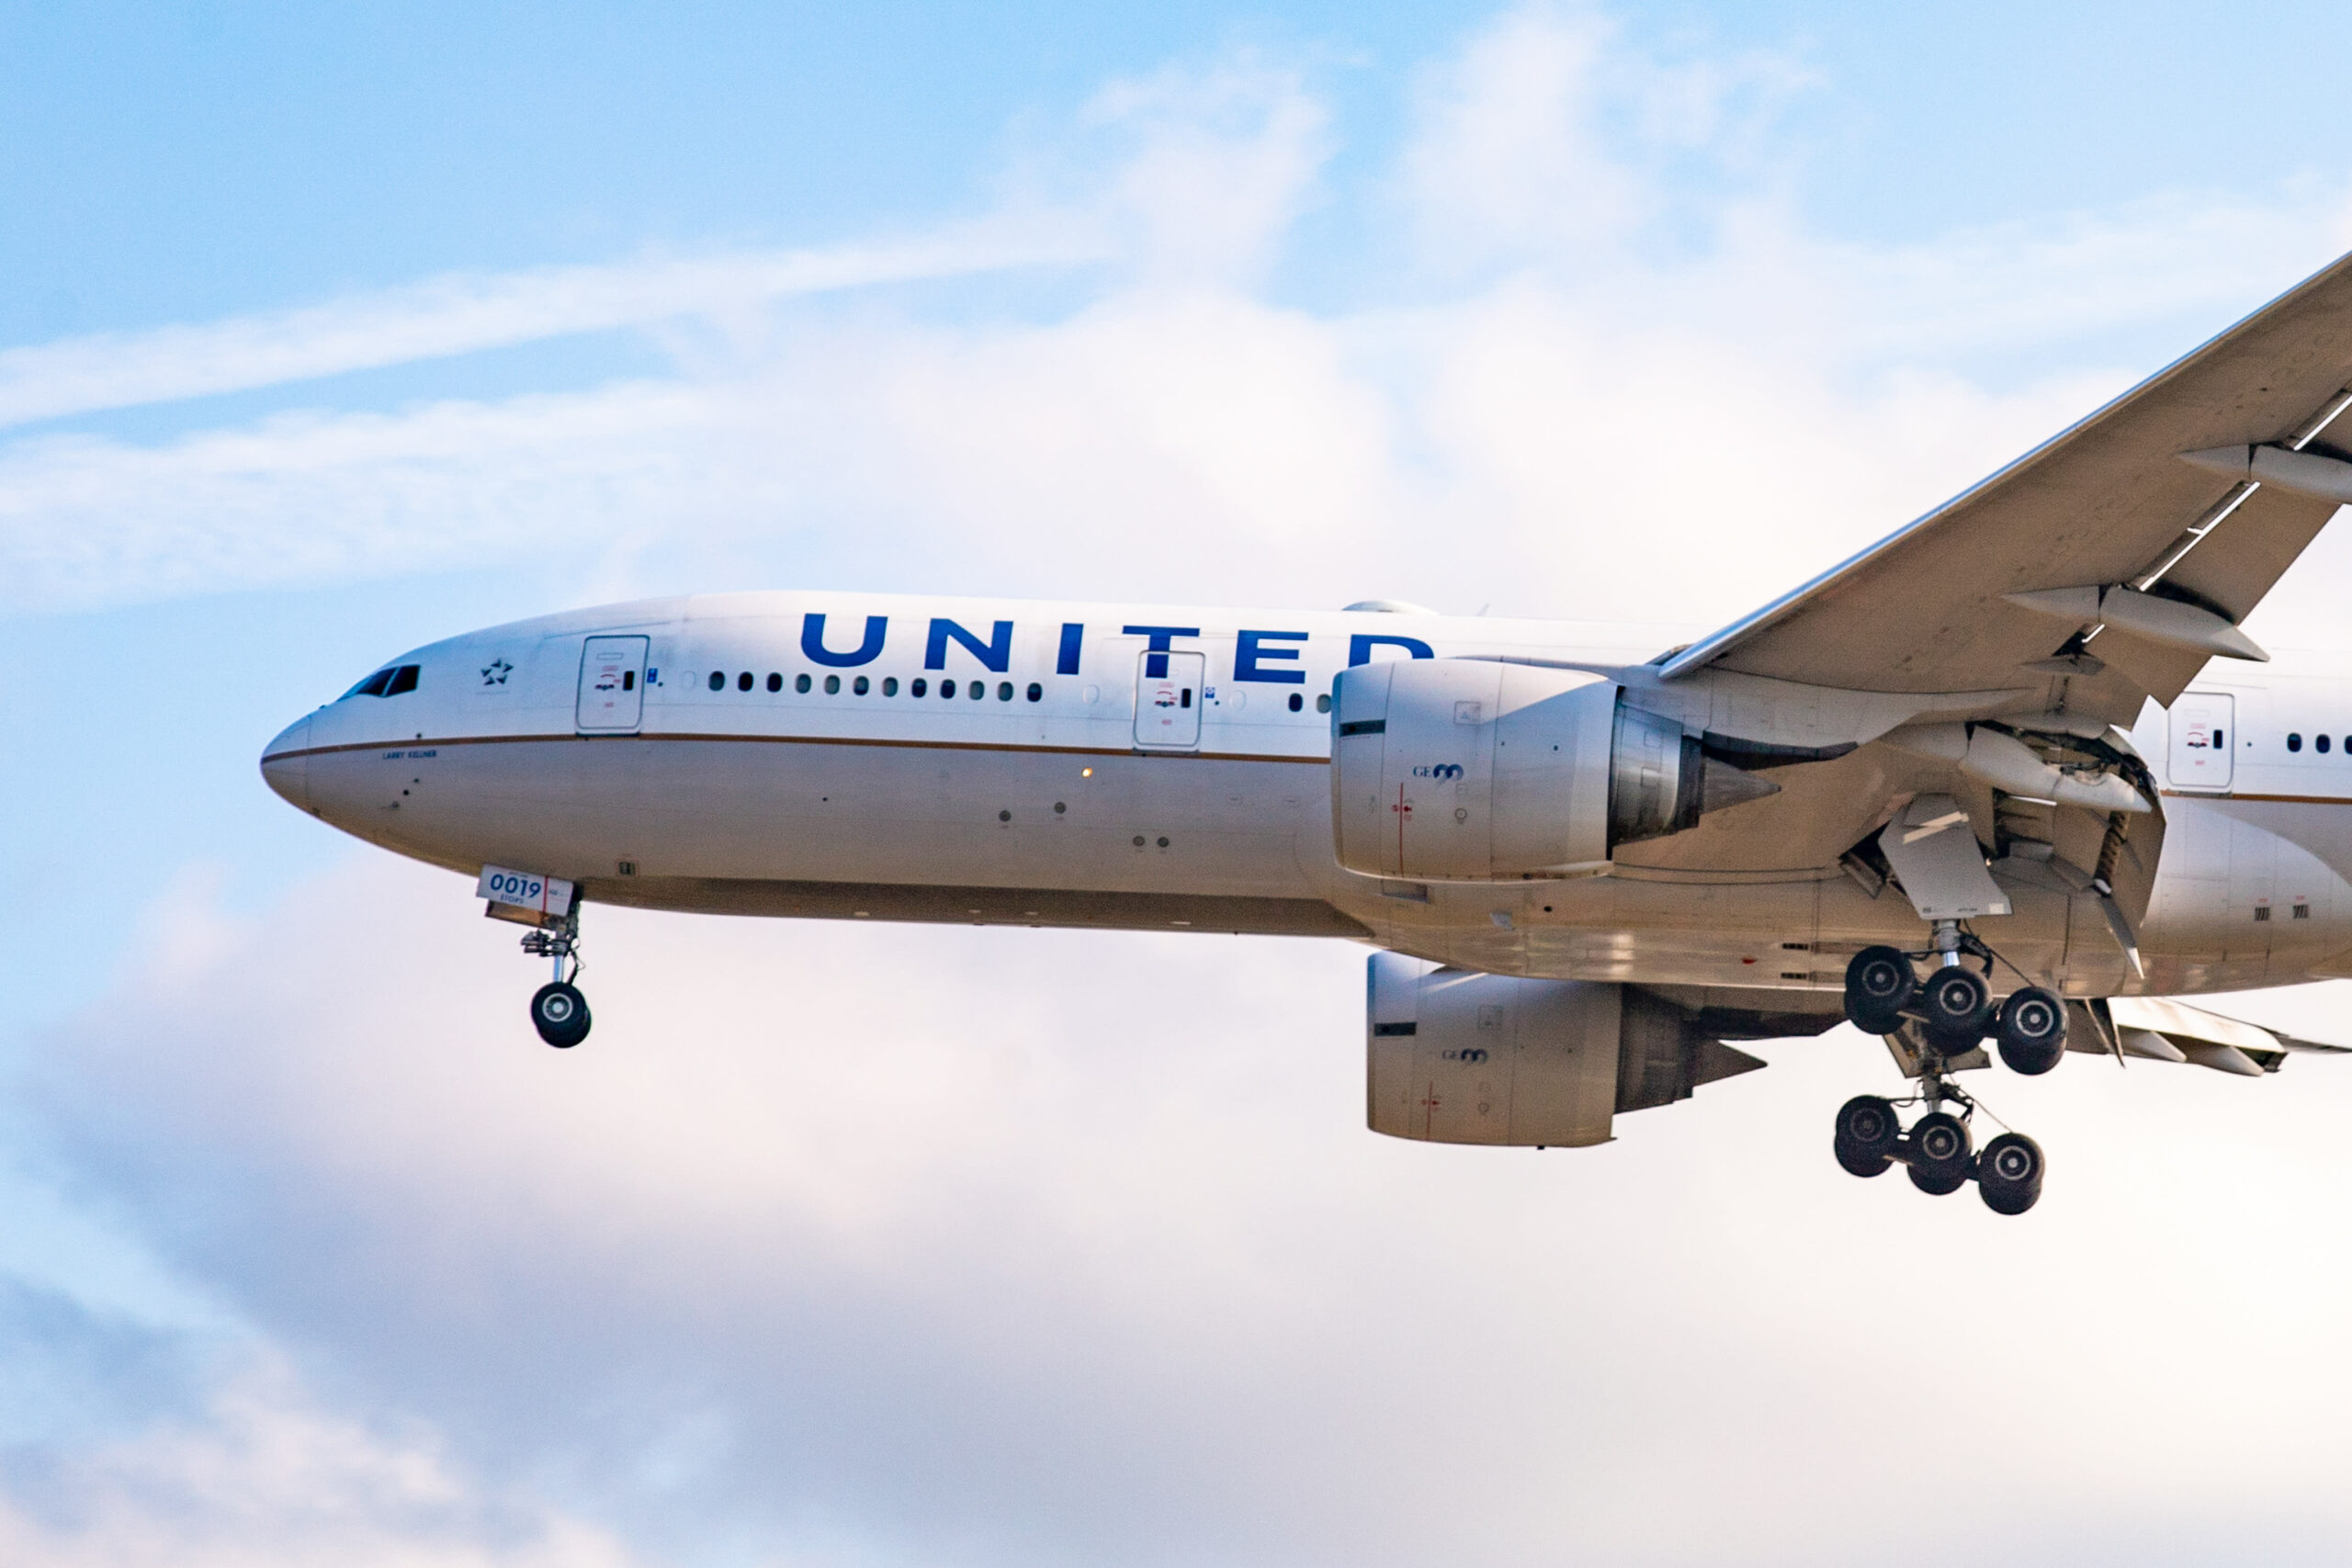 United, pilots union access agreements for early retirements and voluntary furloughs